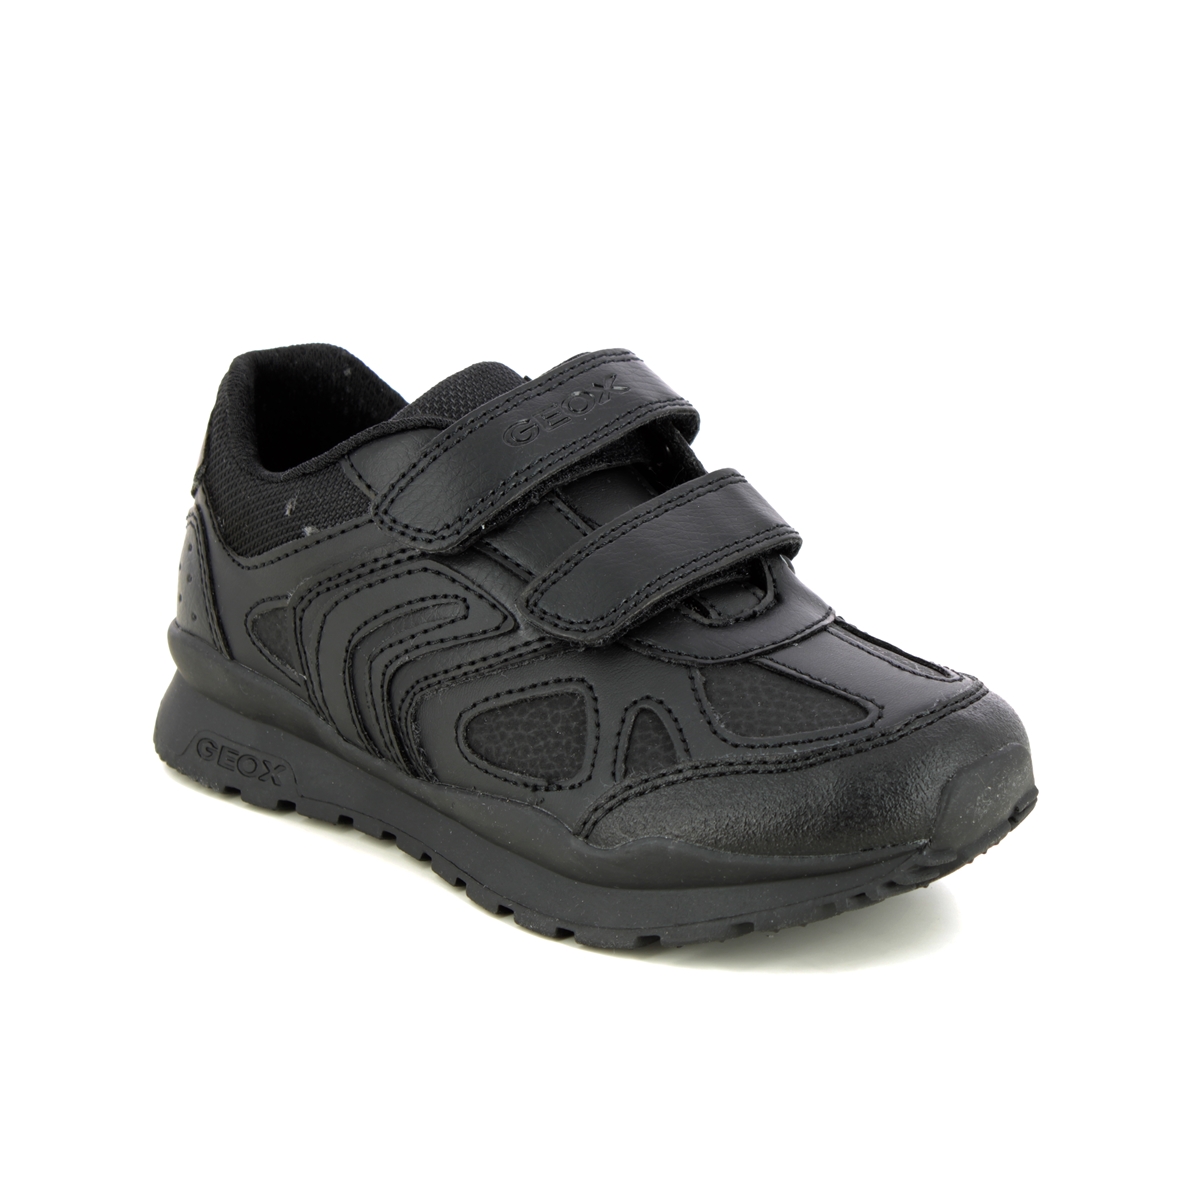 Geox Pavel 2v Black Kids Boys Shoes J0415C-C9999 in a Plain  in Size 35